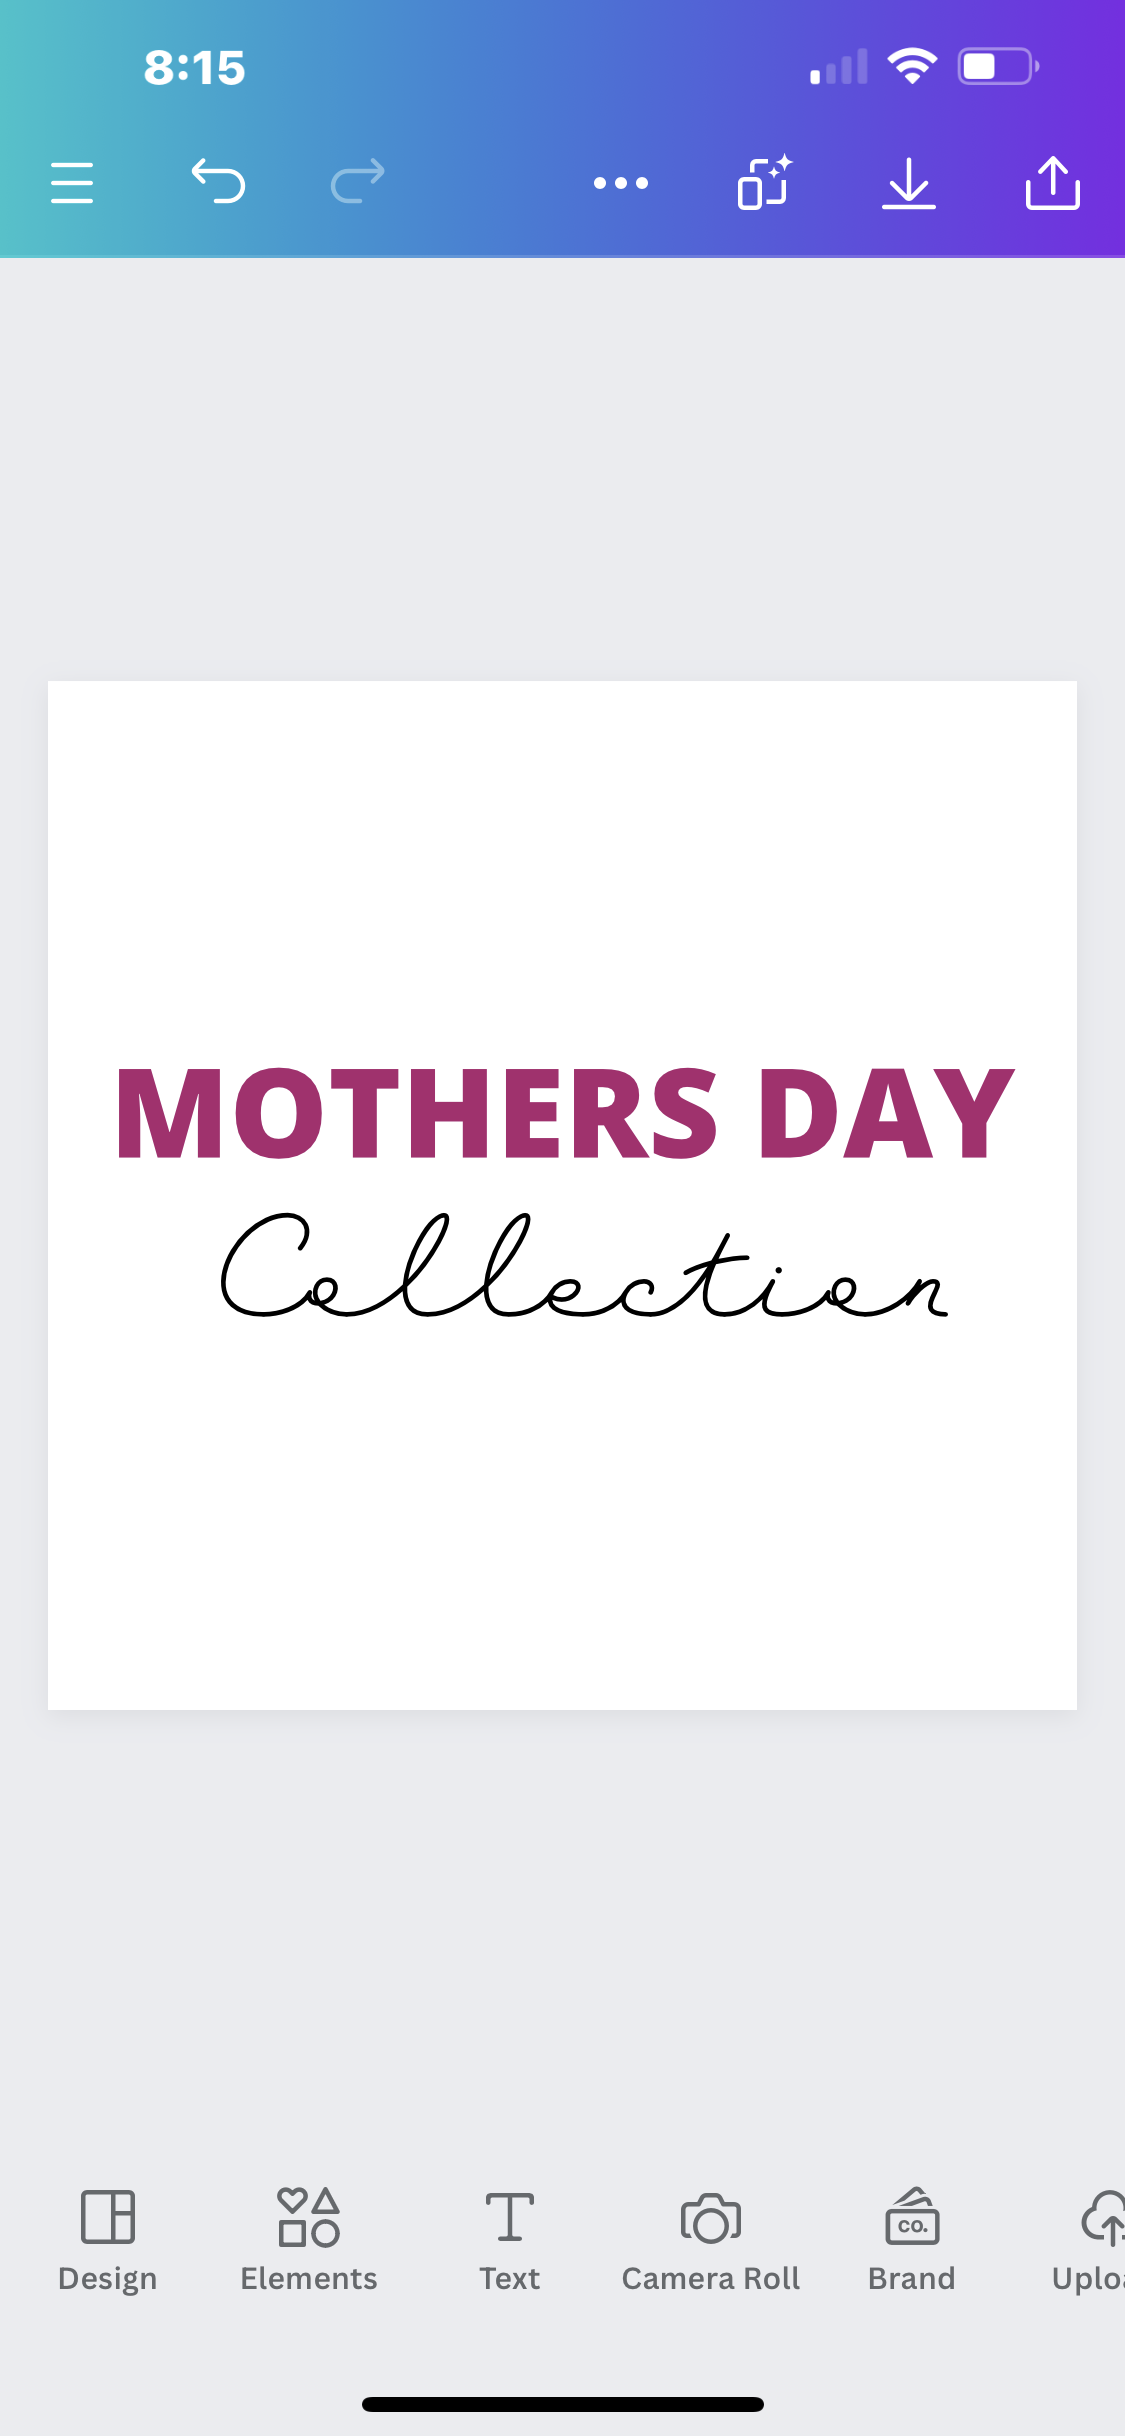 Mother’s Day collection